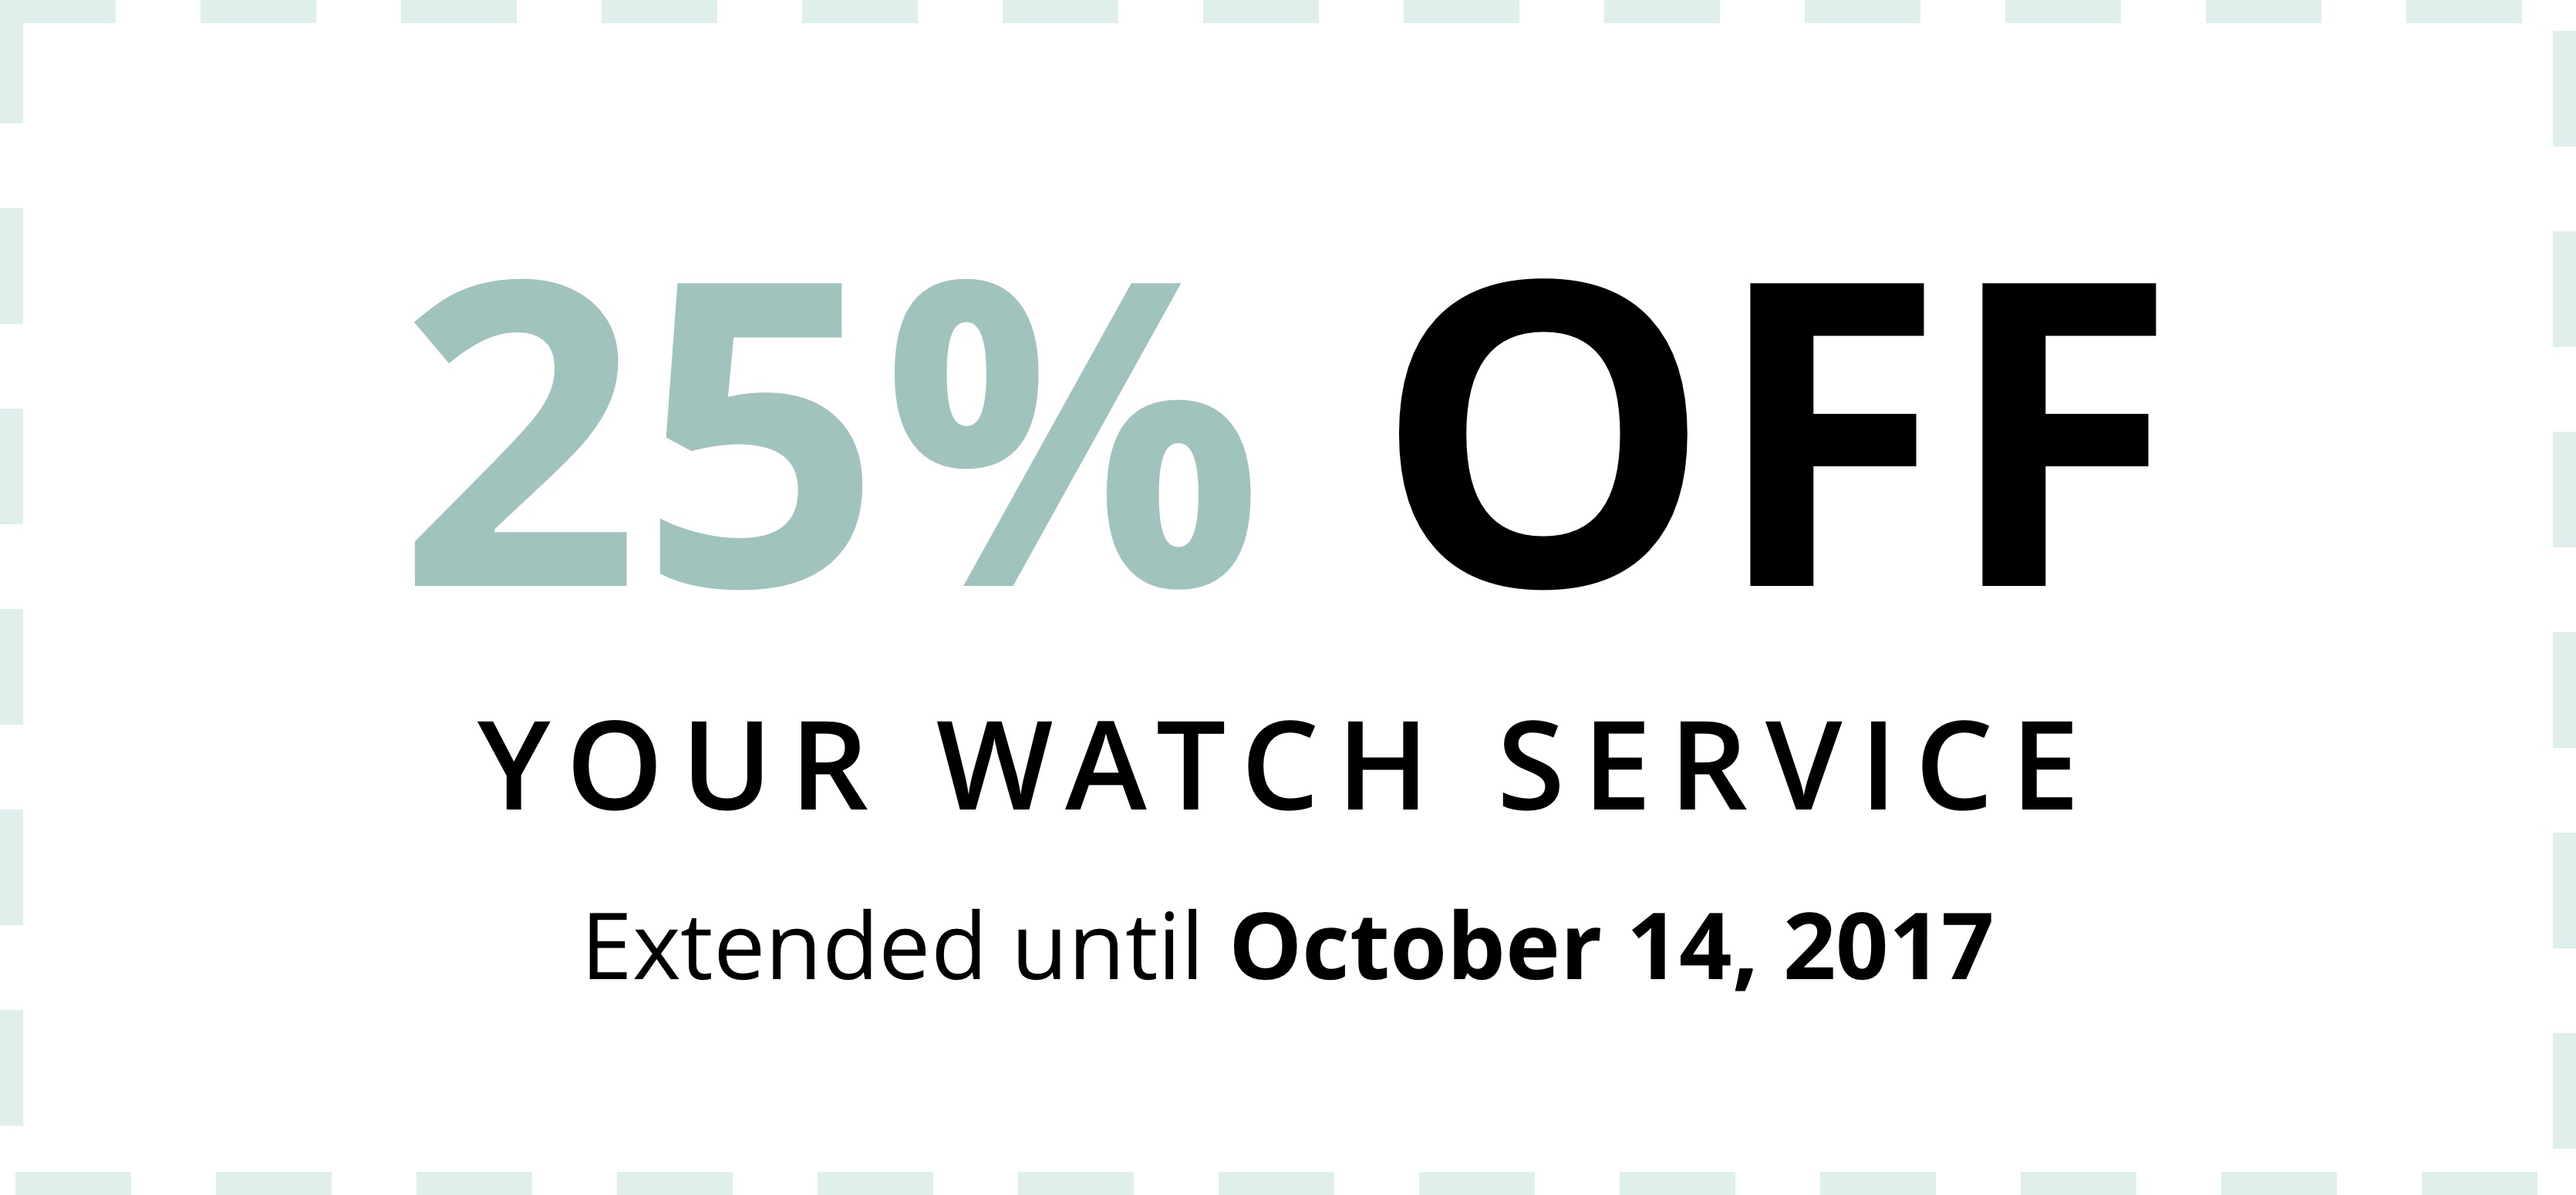 WATCH SERVICE PROMO EXTENDED